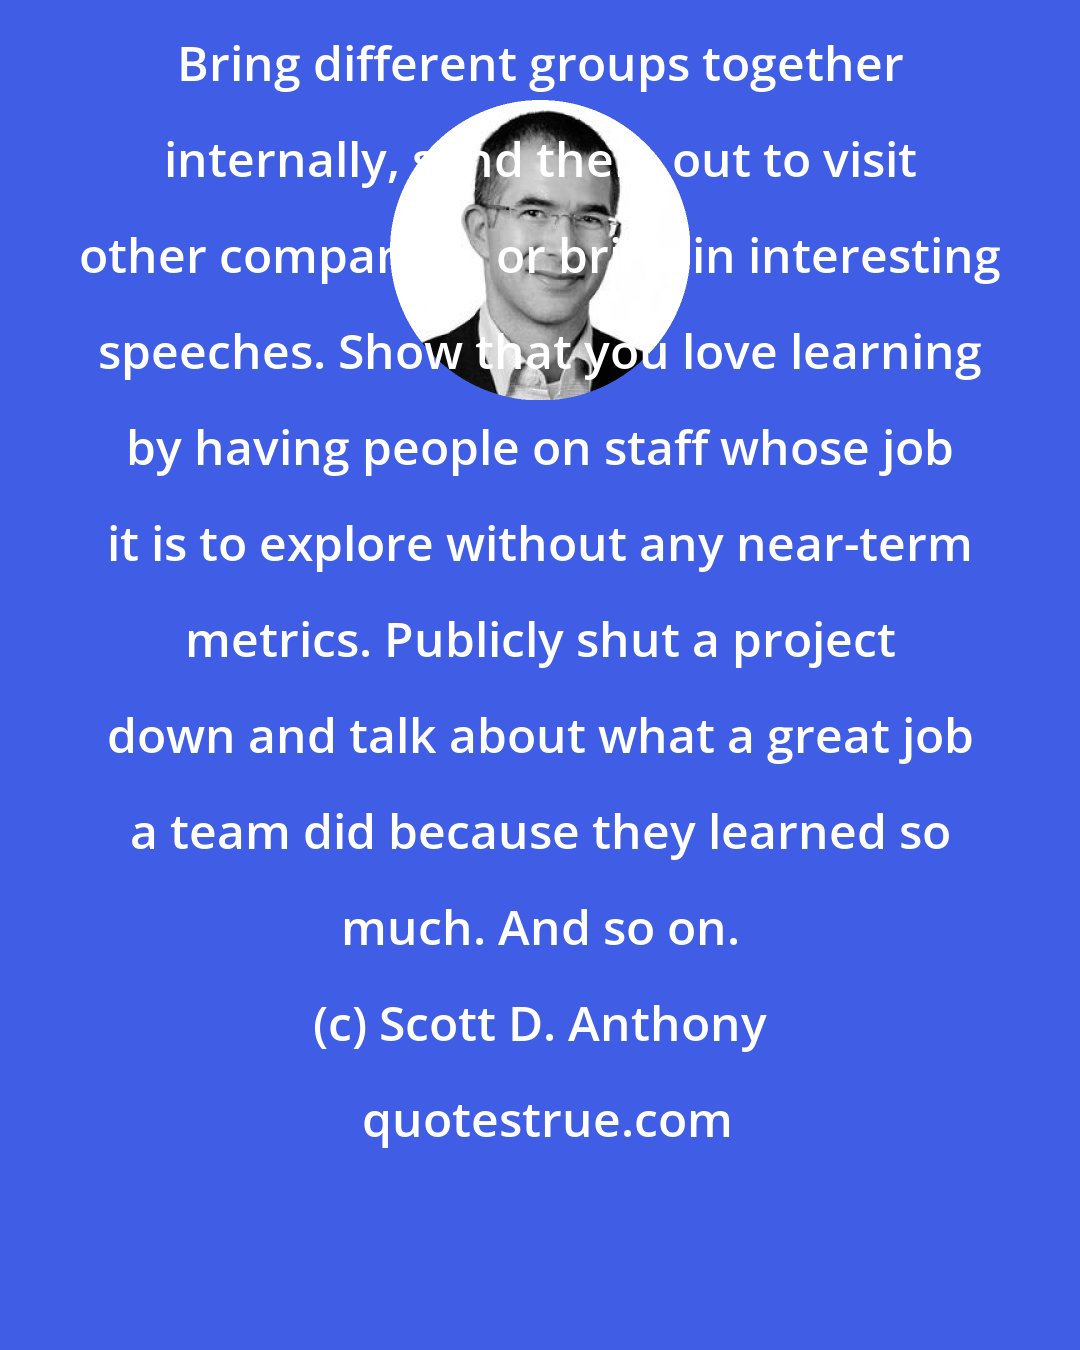 Scott D. Anthony: Bring different groups together internally, send them out to visit other companies, or bring in interesting speeches. Show that you love learning by having people on staff whose job it is to explore without any near-term metrics. Publicly shut a project down and talk about what a great job a team did because they learned so much. And so on.